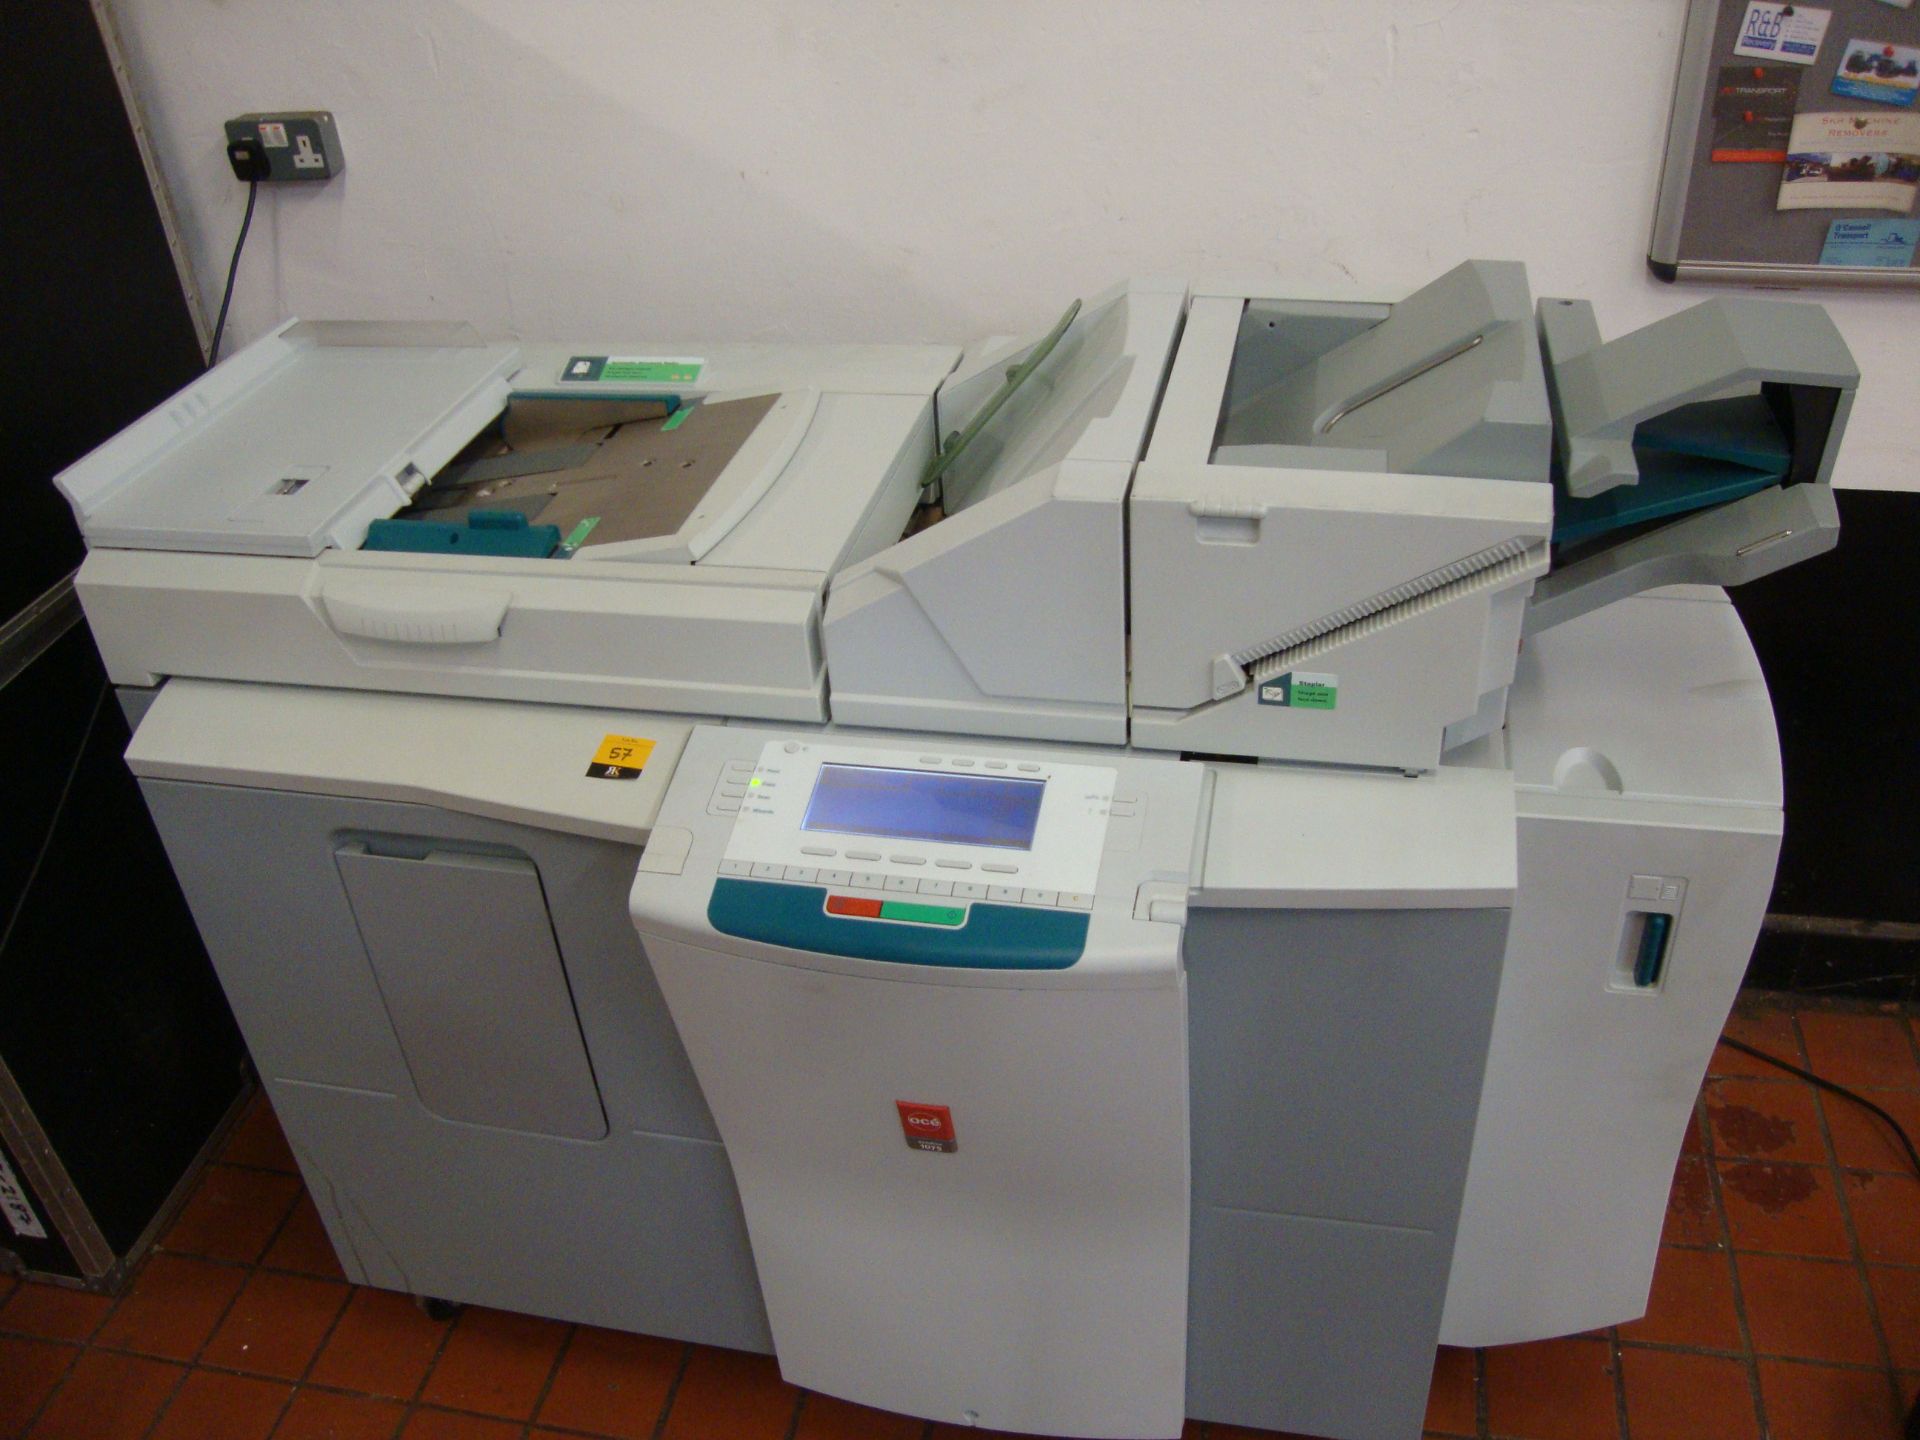 Oce VarioPrint 1075 large heavy duty printer. Please note this lot includes the 2-section flight